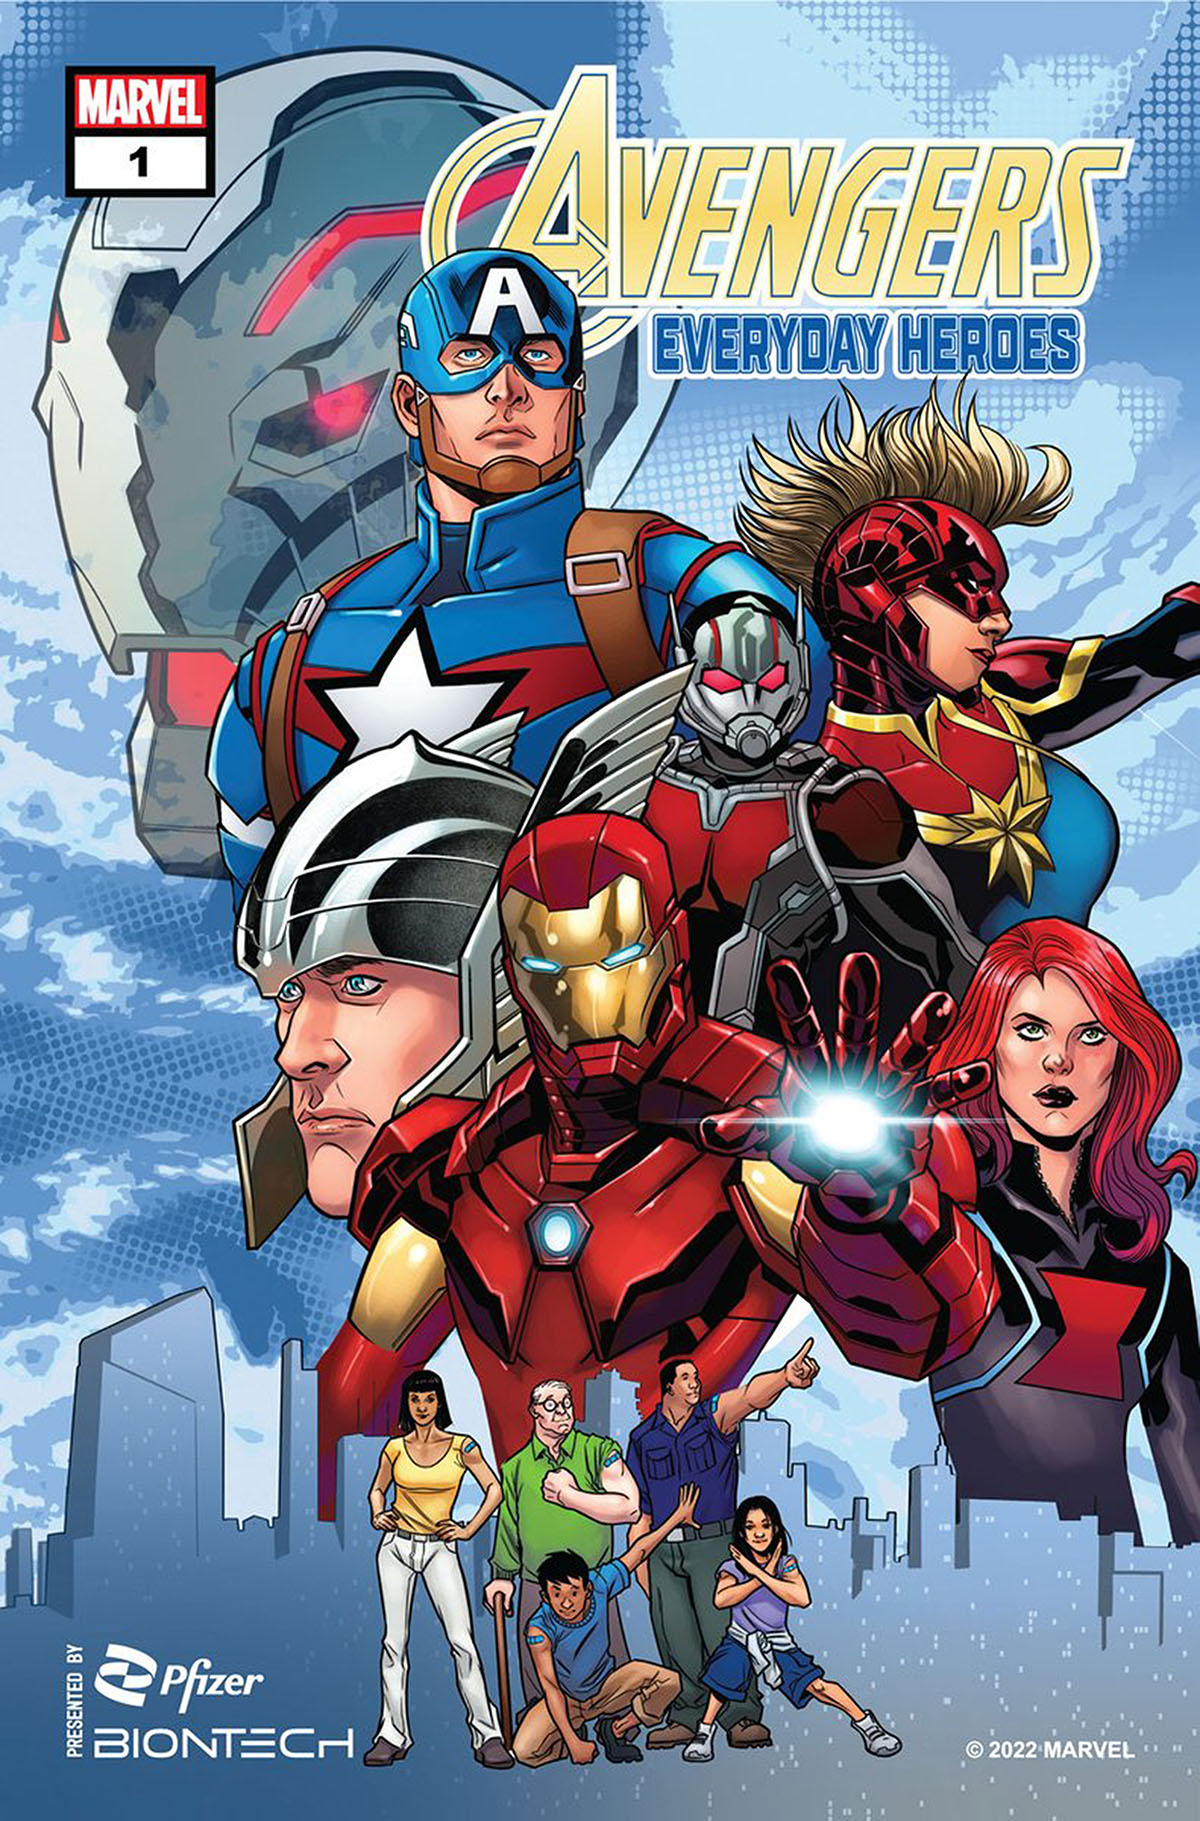 A comic book cover for Avengers Everyday Heroes with Captain America, Captain Marvel, Ant-Man, Thor, Iron Man, and Black Widow shown in front of a head of Ultron with a family of five shown below them with Band-Aids on their arms from where they got their vaccines.